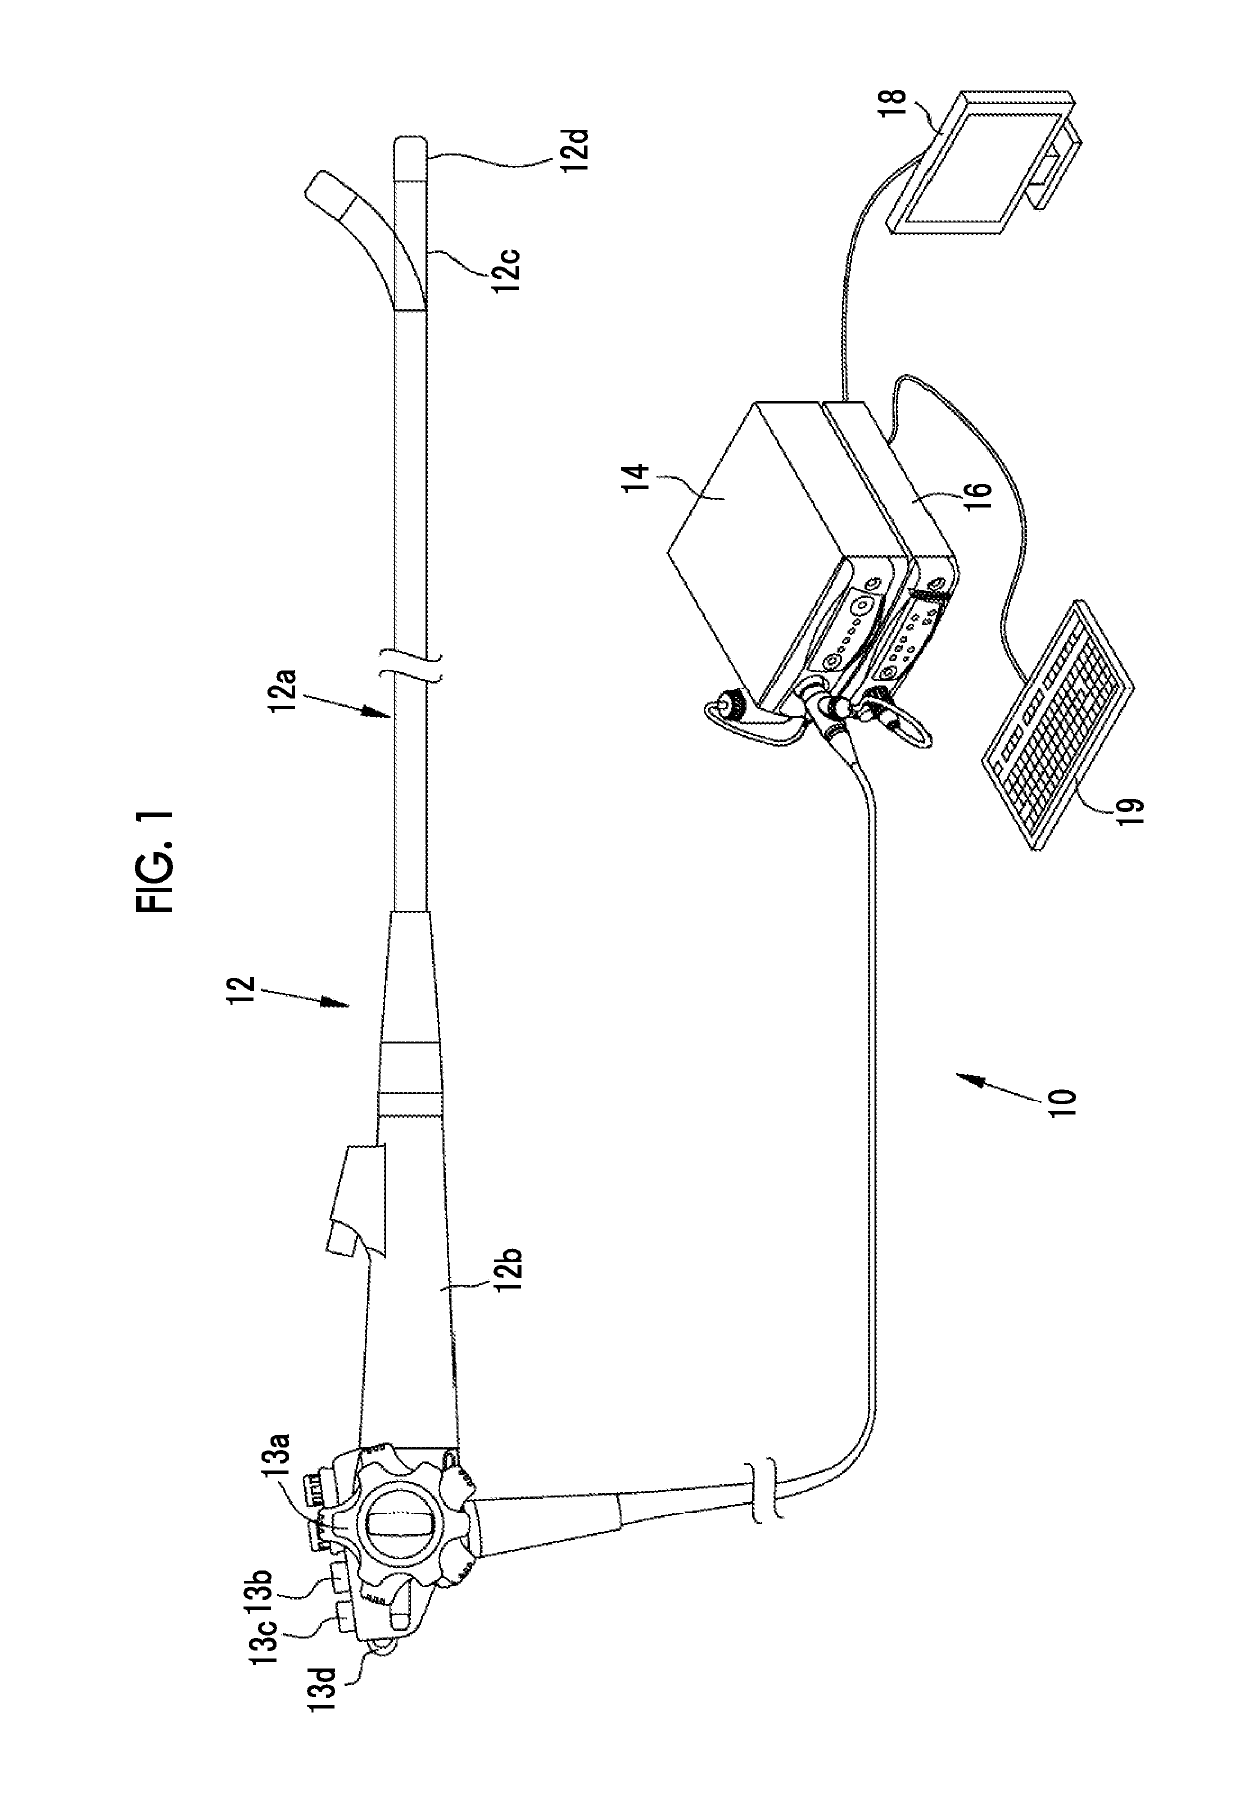 Endoscope system and method of operating same